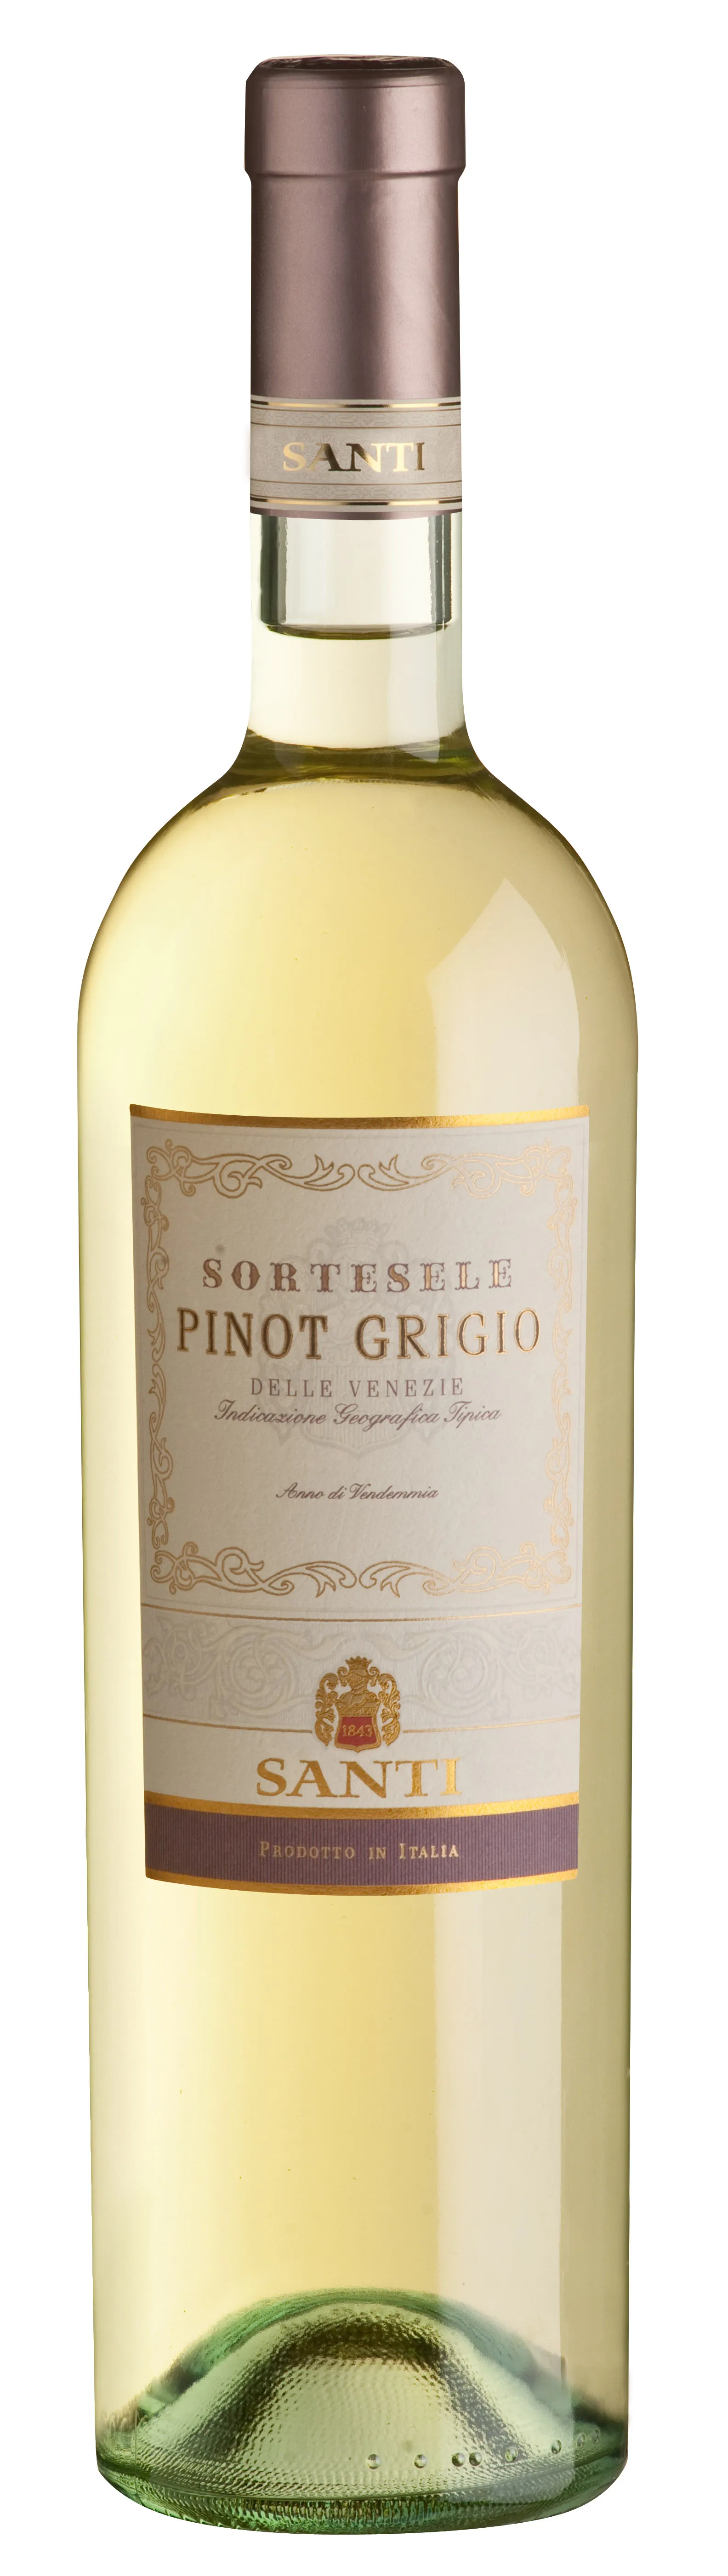 Bottle of Santi Sortesele Pinot Grigiowith label visible